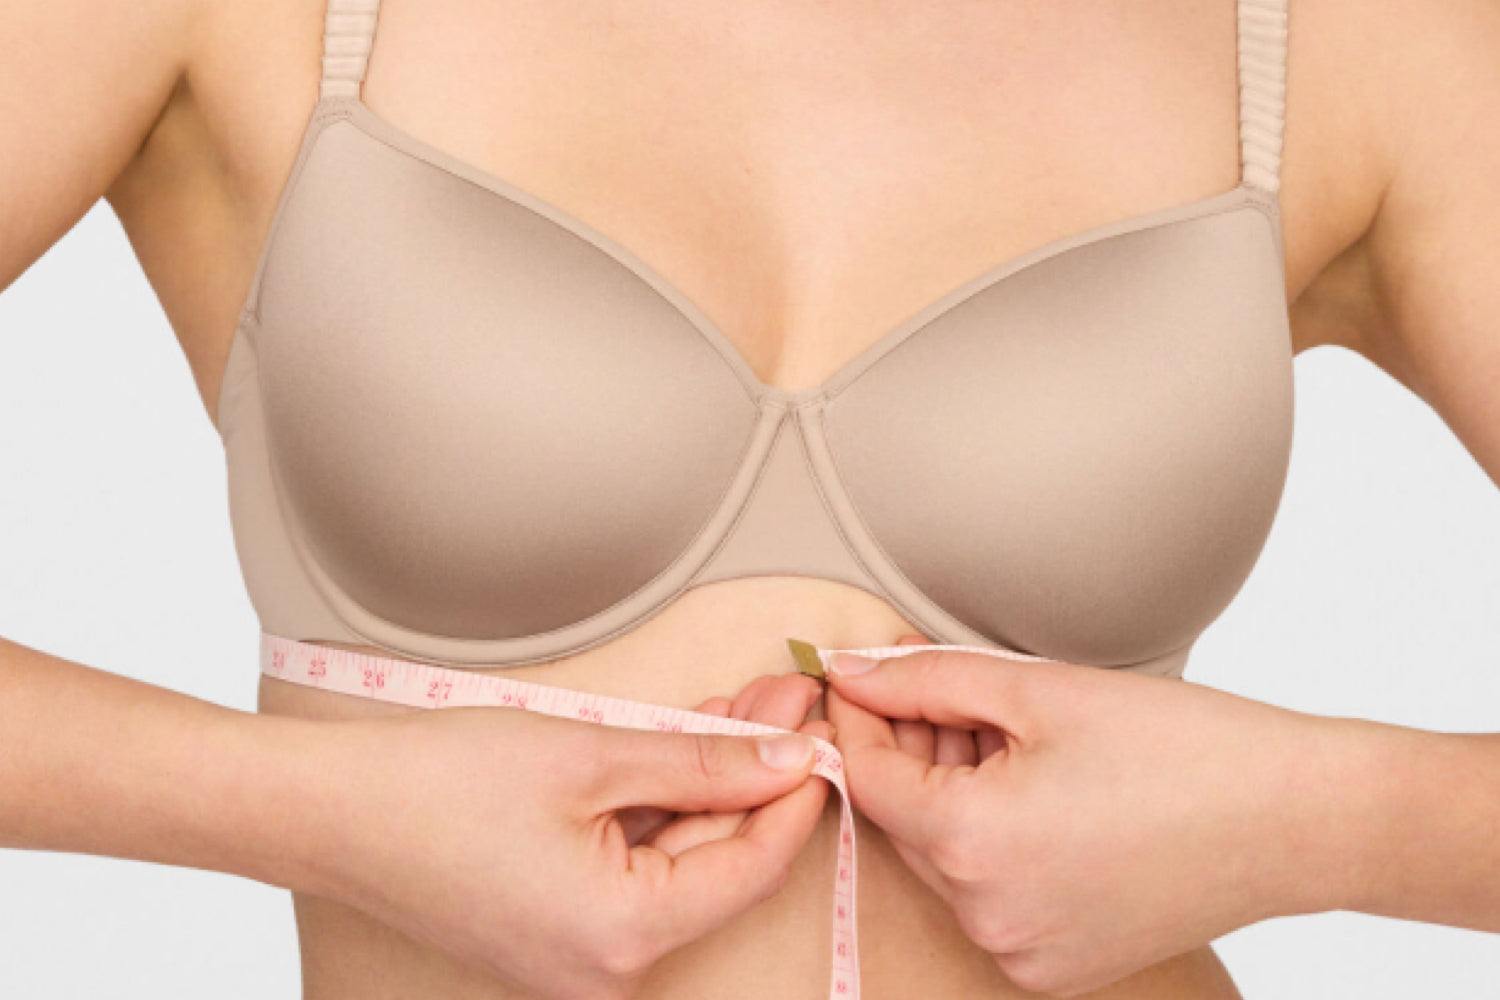 How to Measure Bra Cup Size at Home 